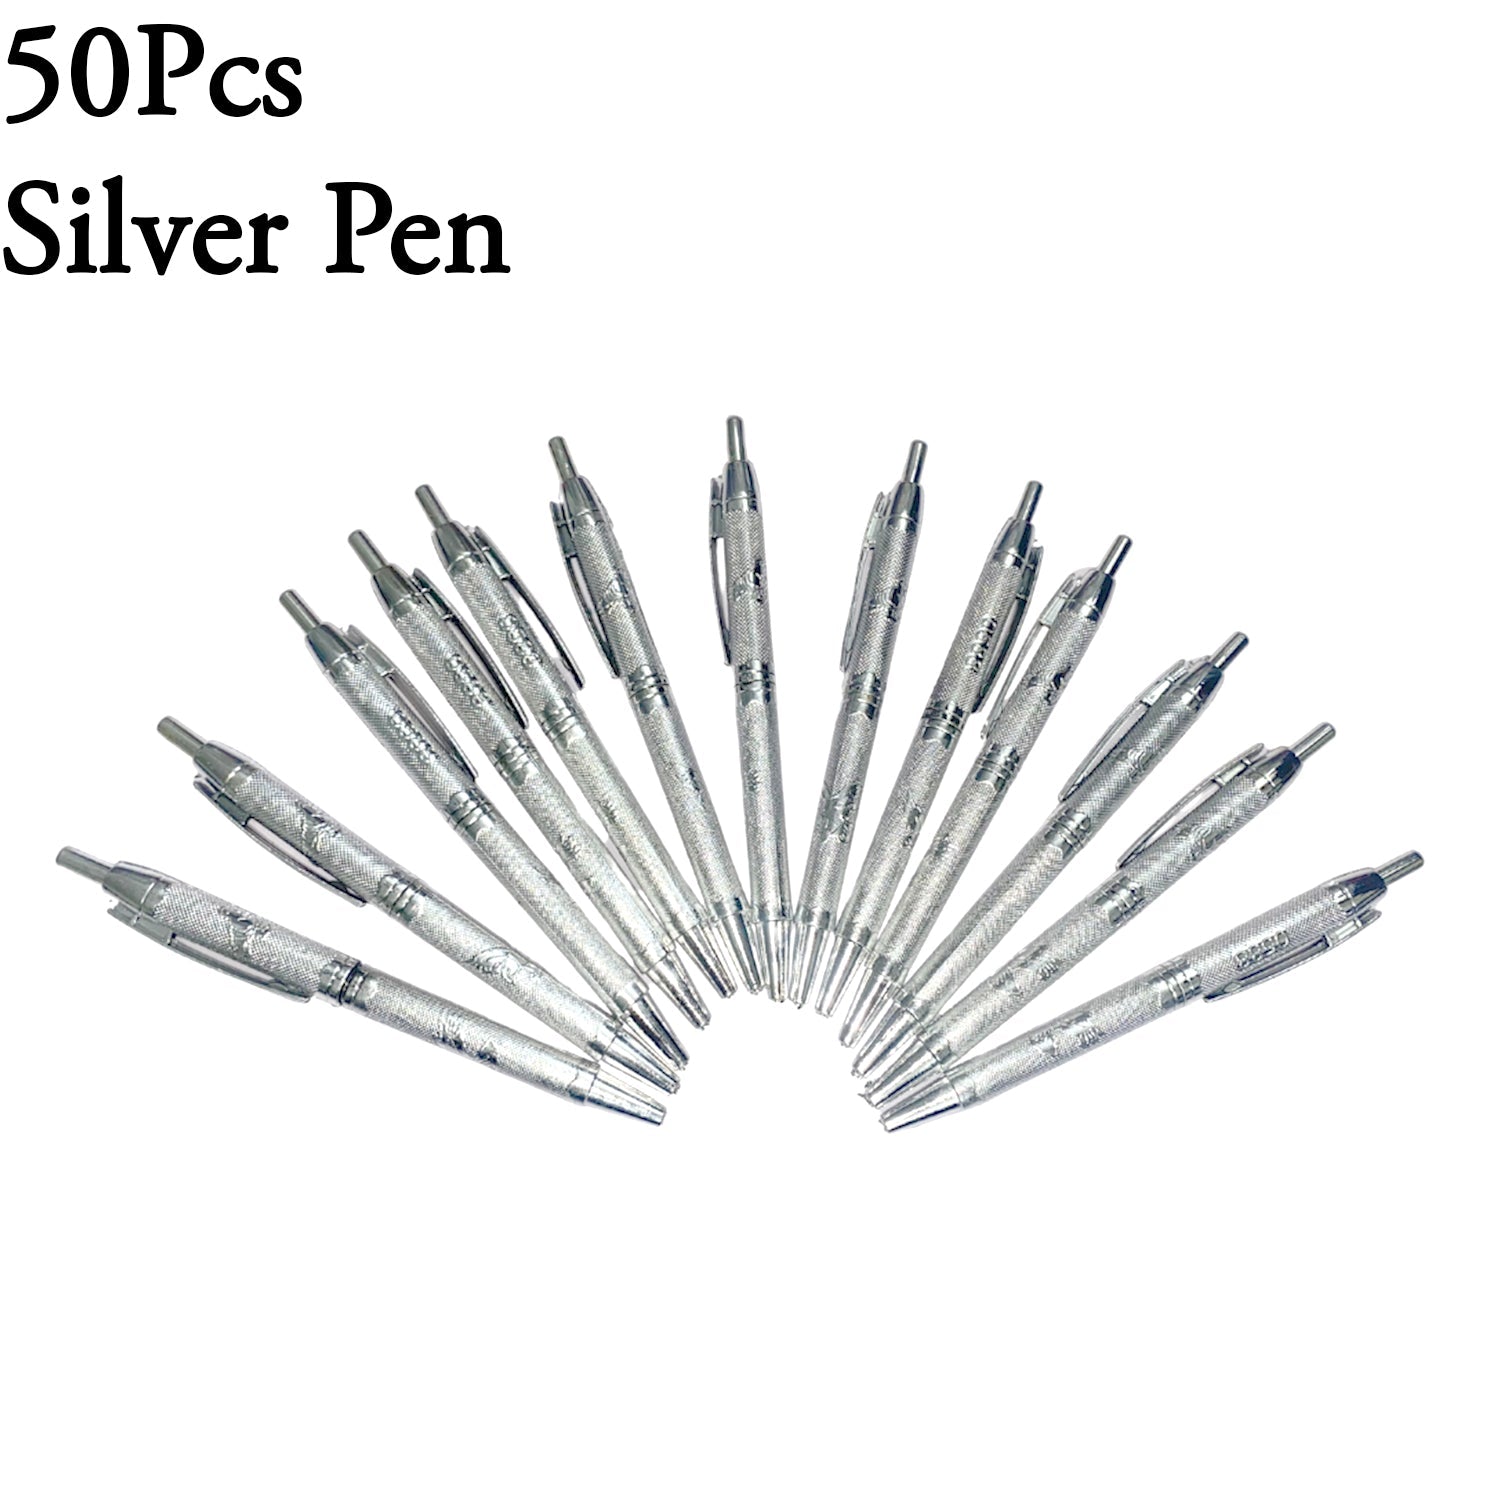 0517 Classic Ball Pen (Pack of 50)